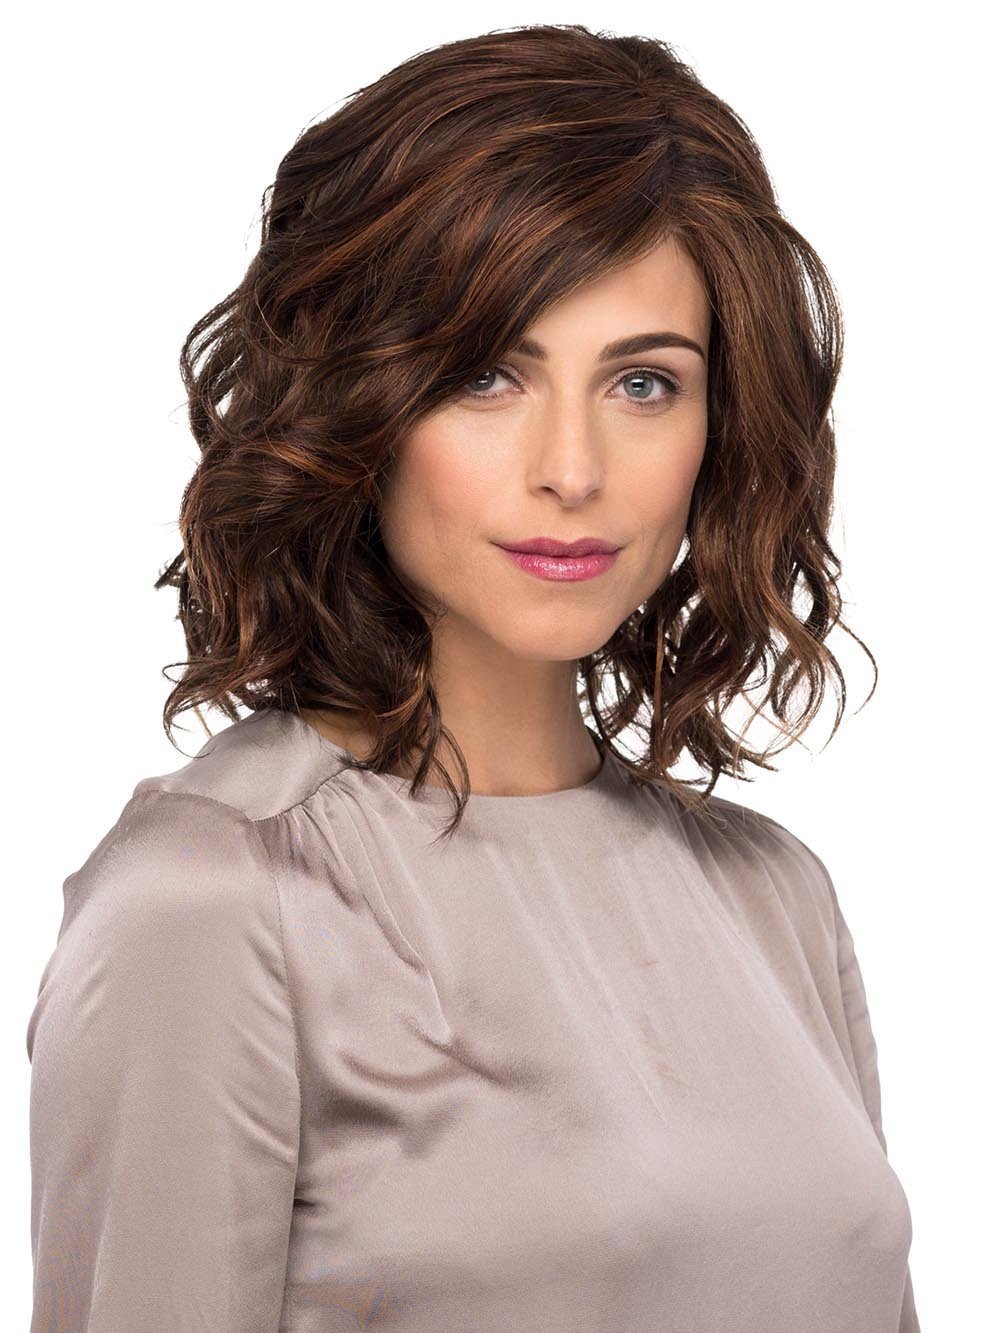 A loose, wavy, mid-length bob that looks and feels wonderfully natural